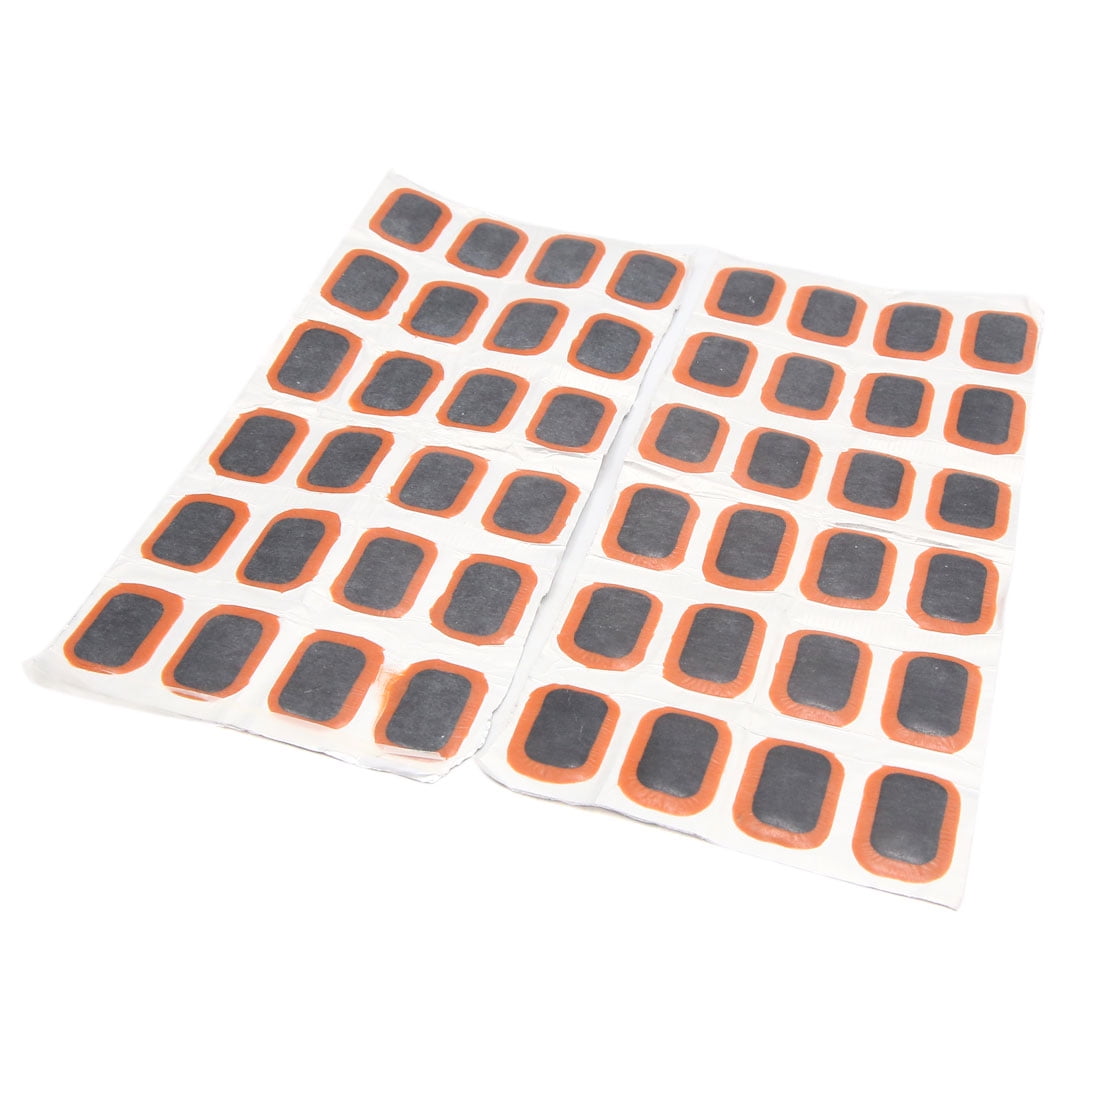 94pcs Tyre Puncture Patches Patch Tire Repair Tool 24 x 35mm for Car Motorcycle 